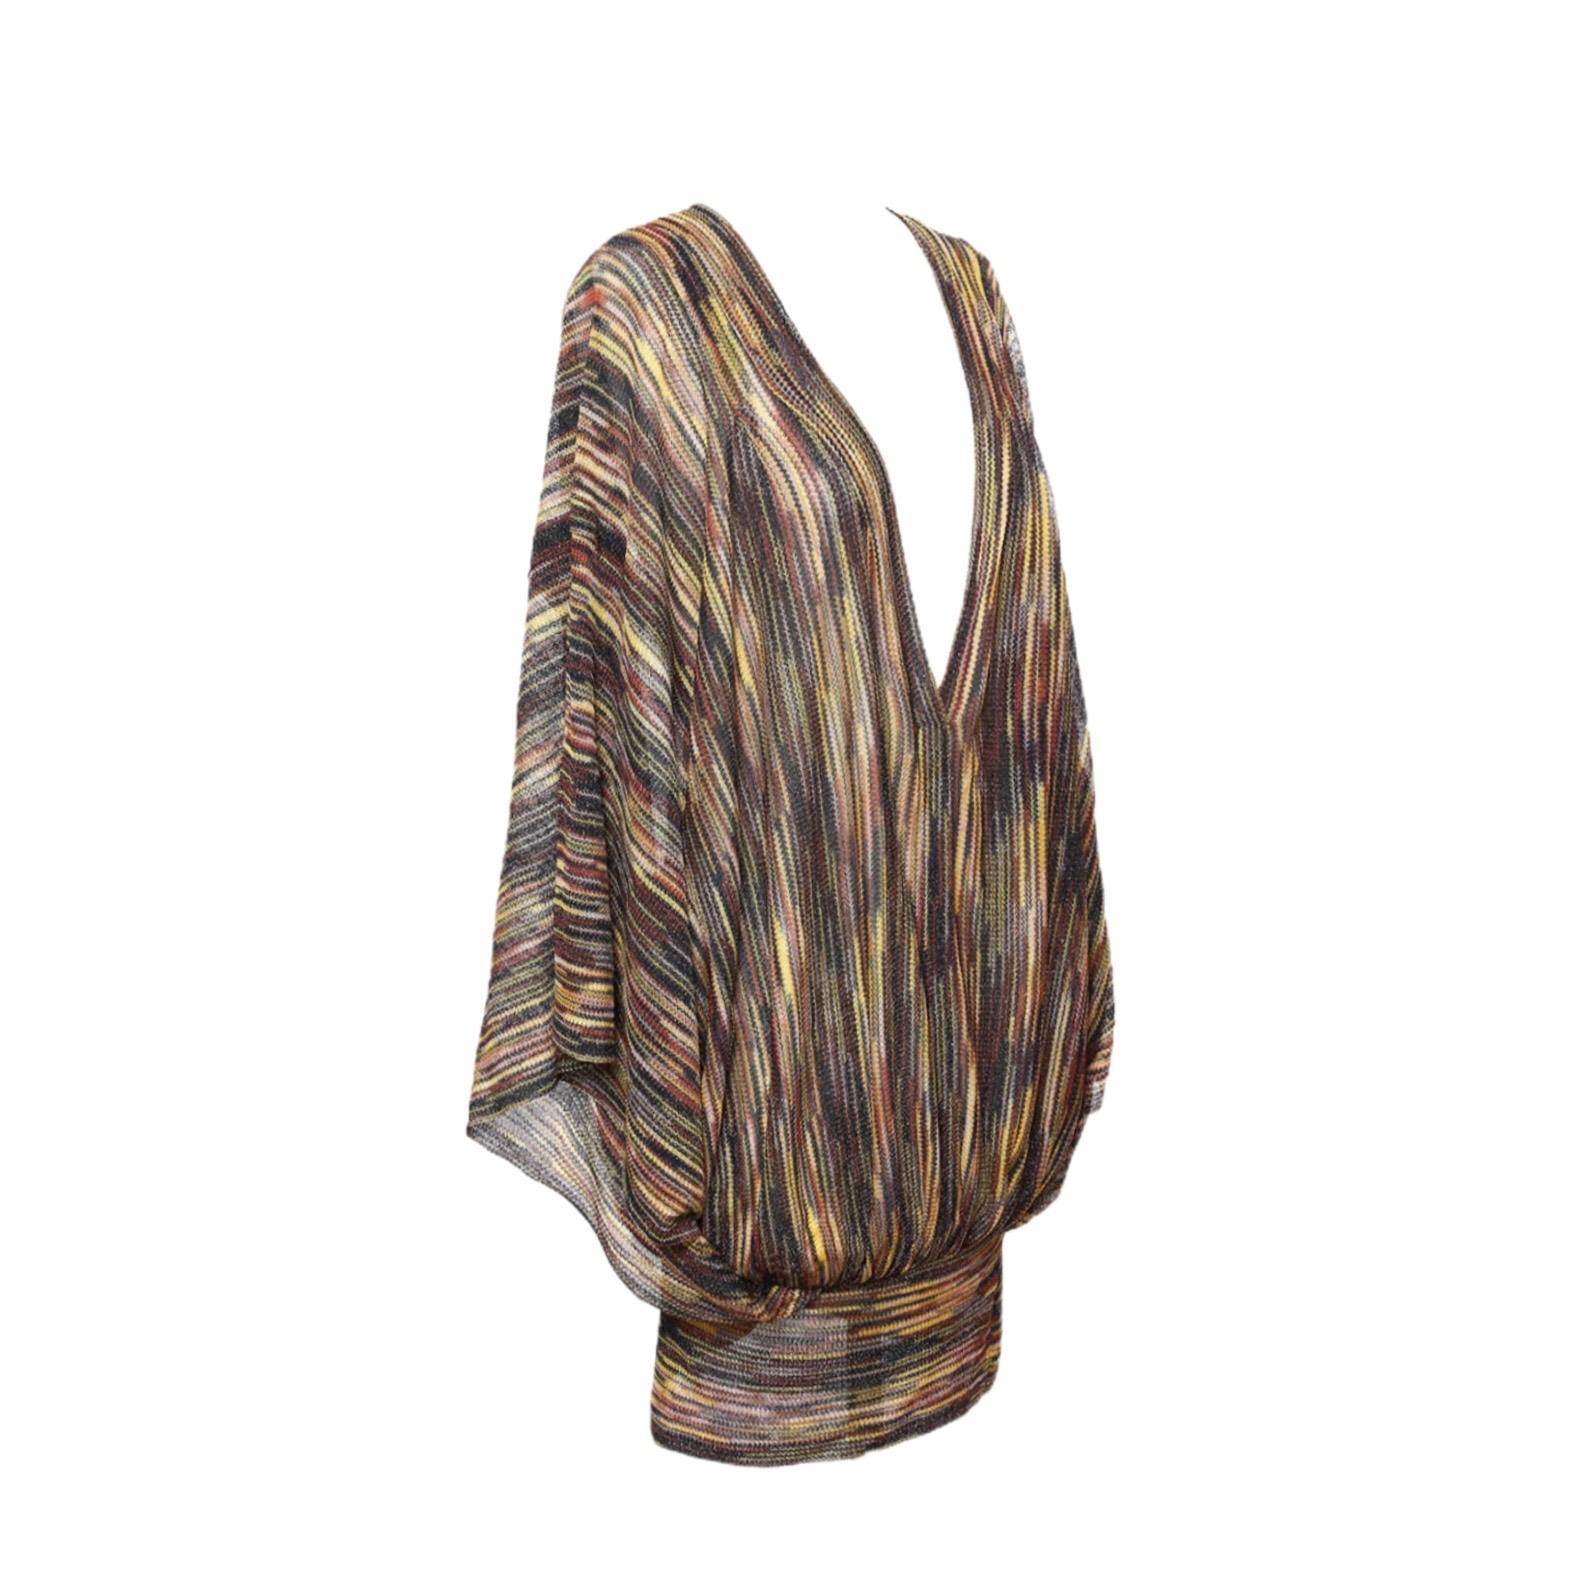 Even knits go metallic this season with molten accents woven through sweaters and cardigans. Tap into the trend with Missoni's lurex striped batwing tunic, a glamorous day-to-evening piece.

Metallic stripe knit 
Beautiful colors with silver